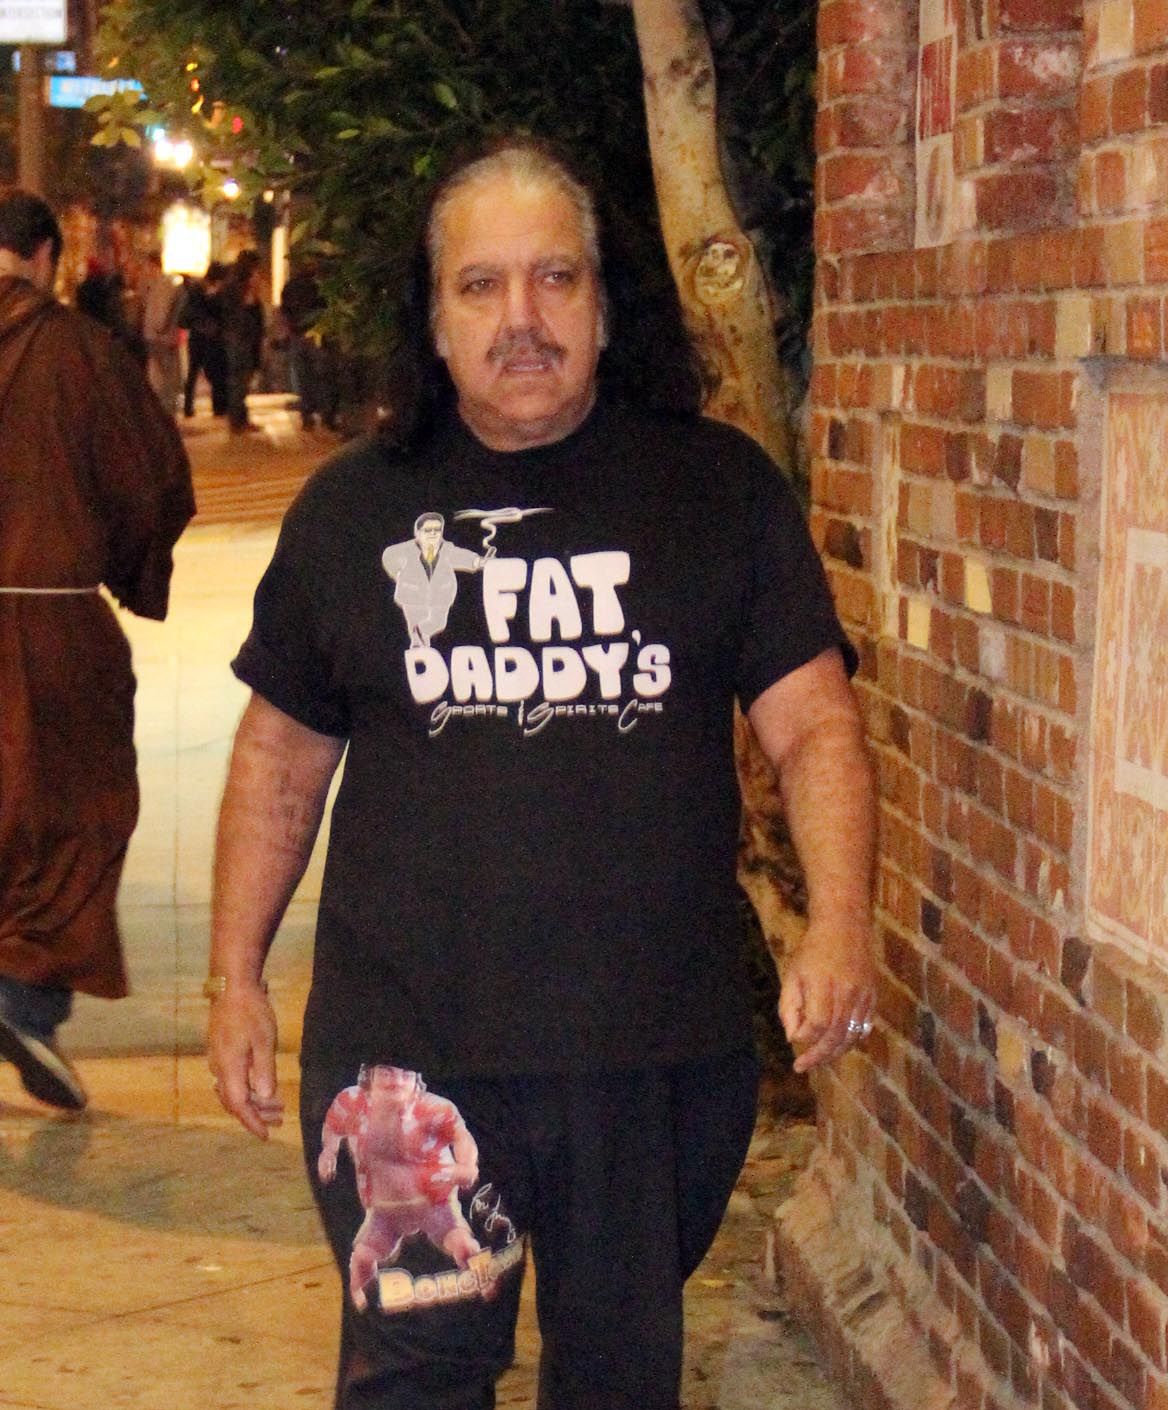 Porn Star Ron Jeremy Hit With Twenty New Sexual Assaults Charges Including A 15 Year Old